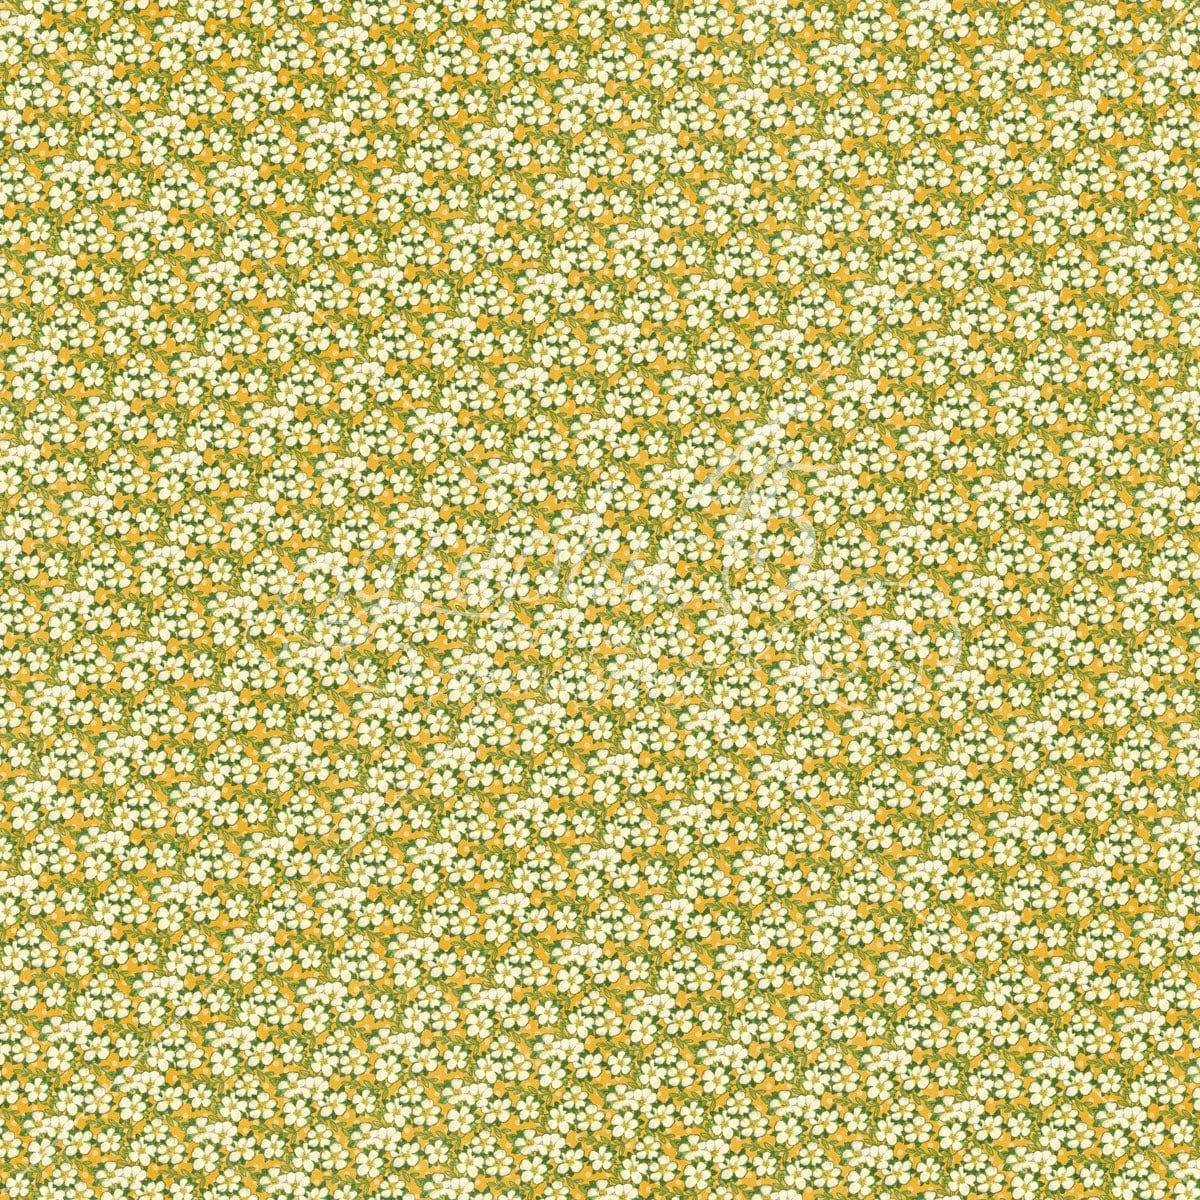 Little Things Collection Hello Ladybug 12 x 12 Double-Sided Scrapbook Paper by Graphic 45 - Scrapbook Supply Companies